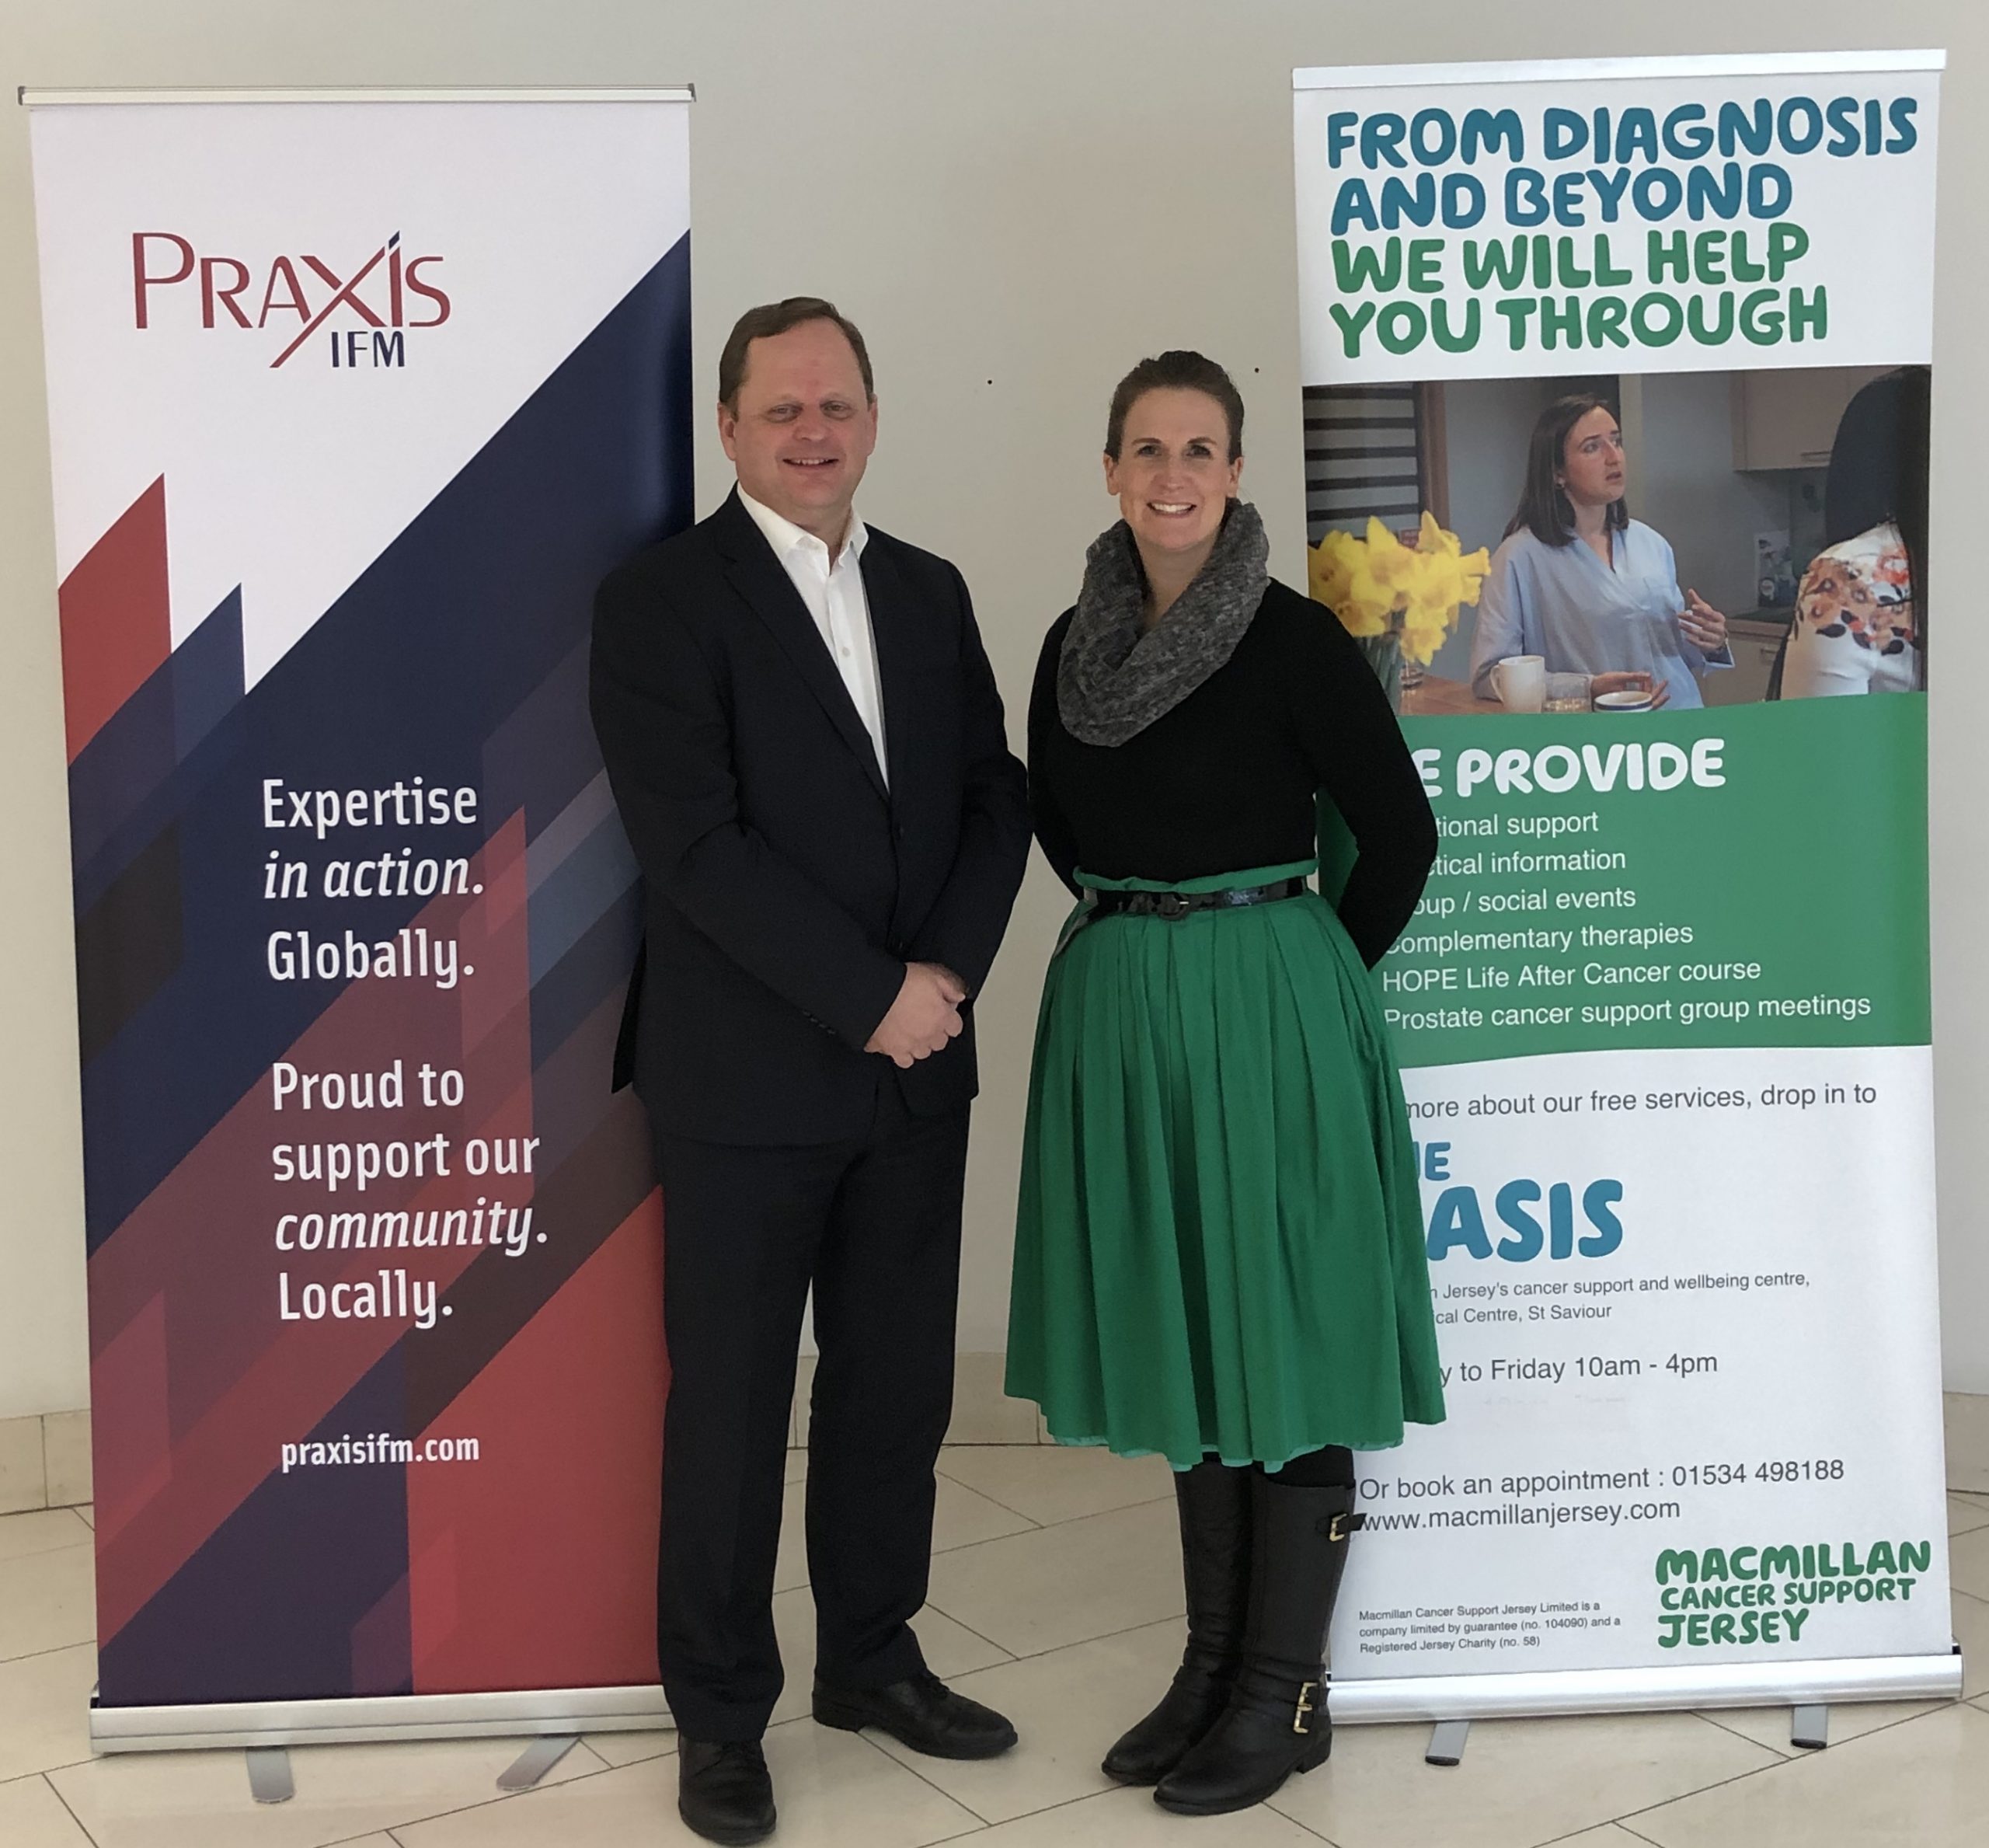 Richard Kearsey standing with a lady in front of Praxis IFM and Macmillan pop up banners